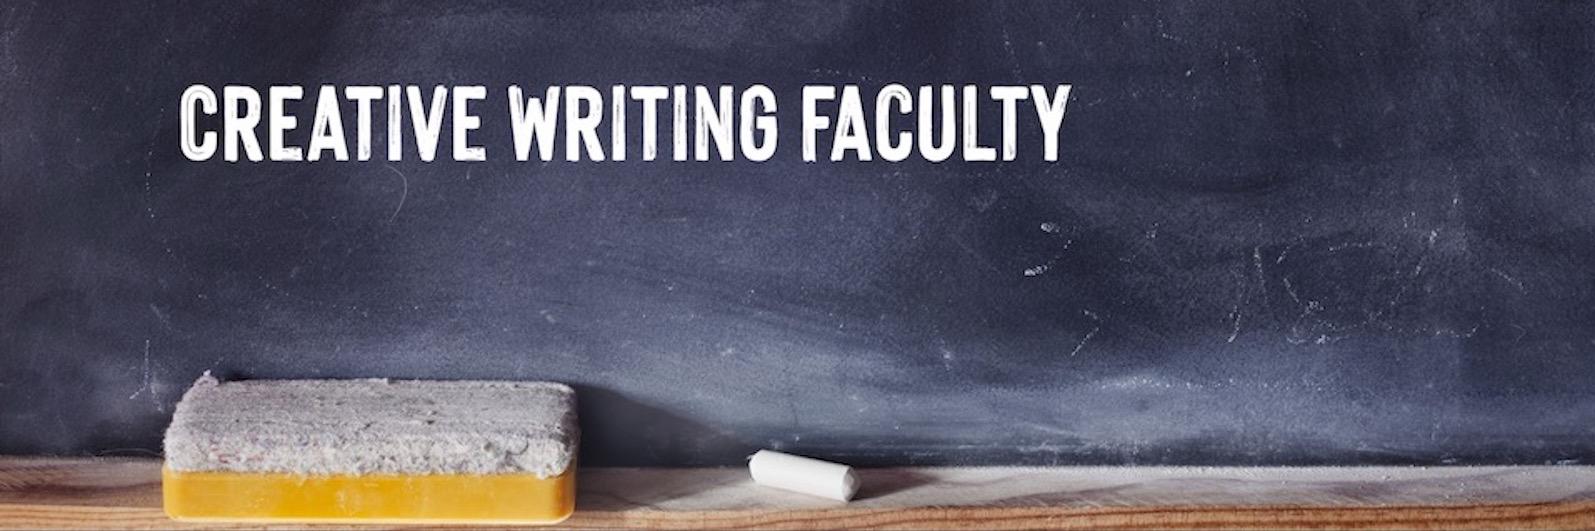 mit creative writing faculty